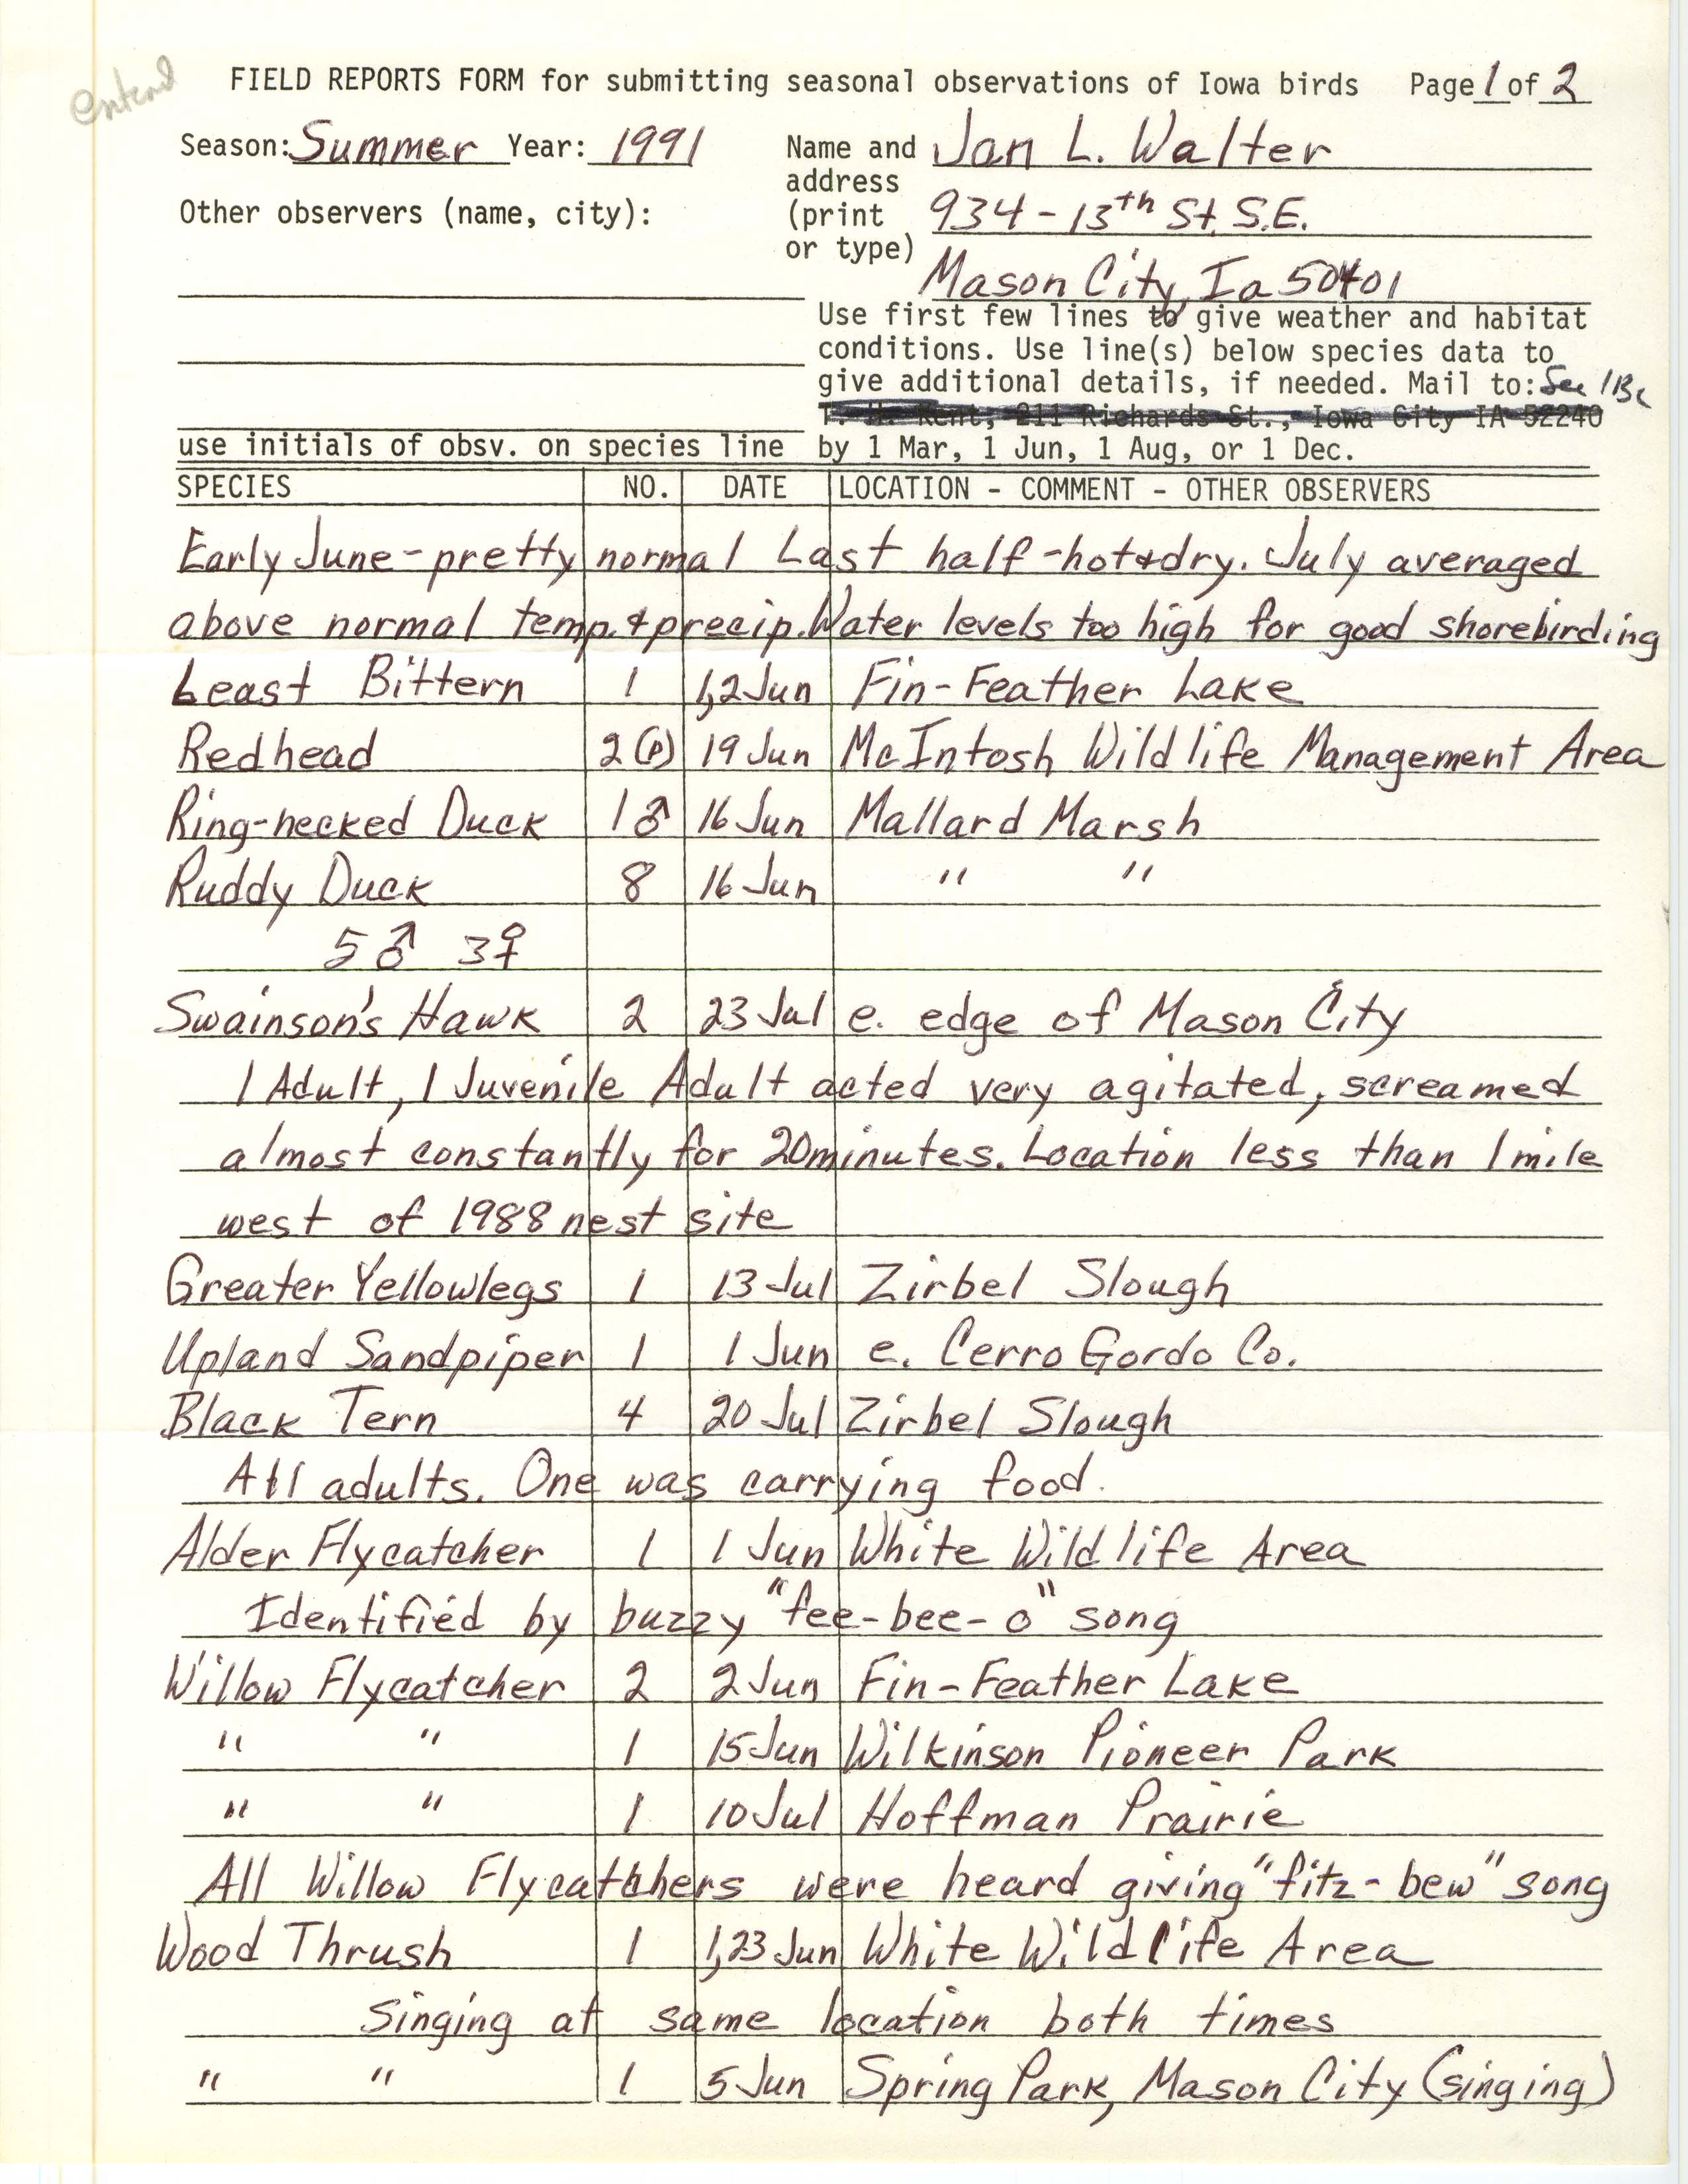 Field reports form for submitting seasonal observations of Iowa birds, Jan L. Walter, summer 1991